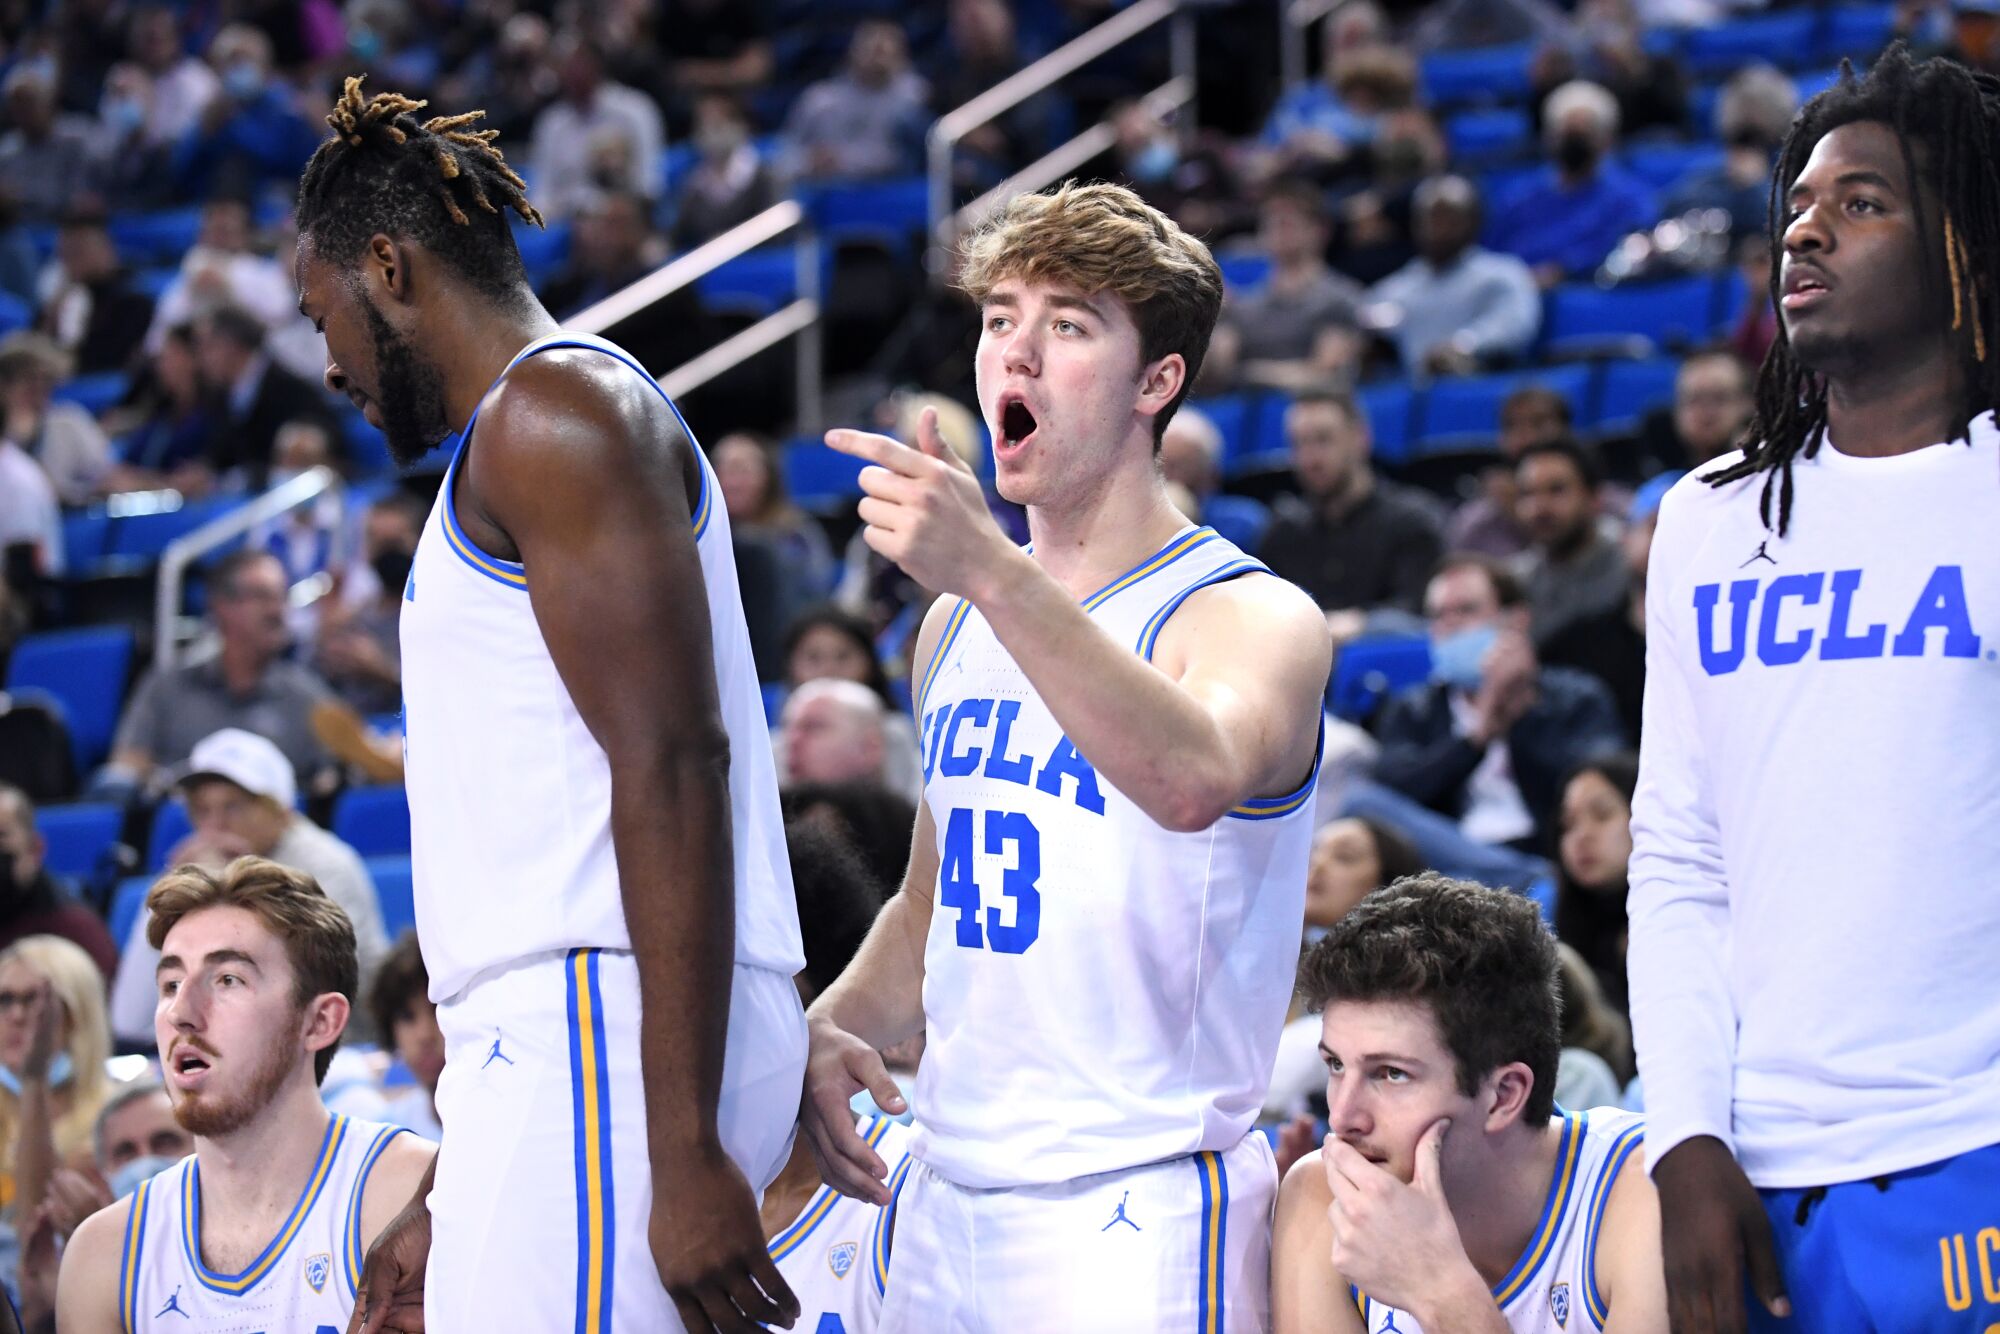 UCLA's Russell Stong cheers during a recent game against Northern Florida at Pauley Pavilion 